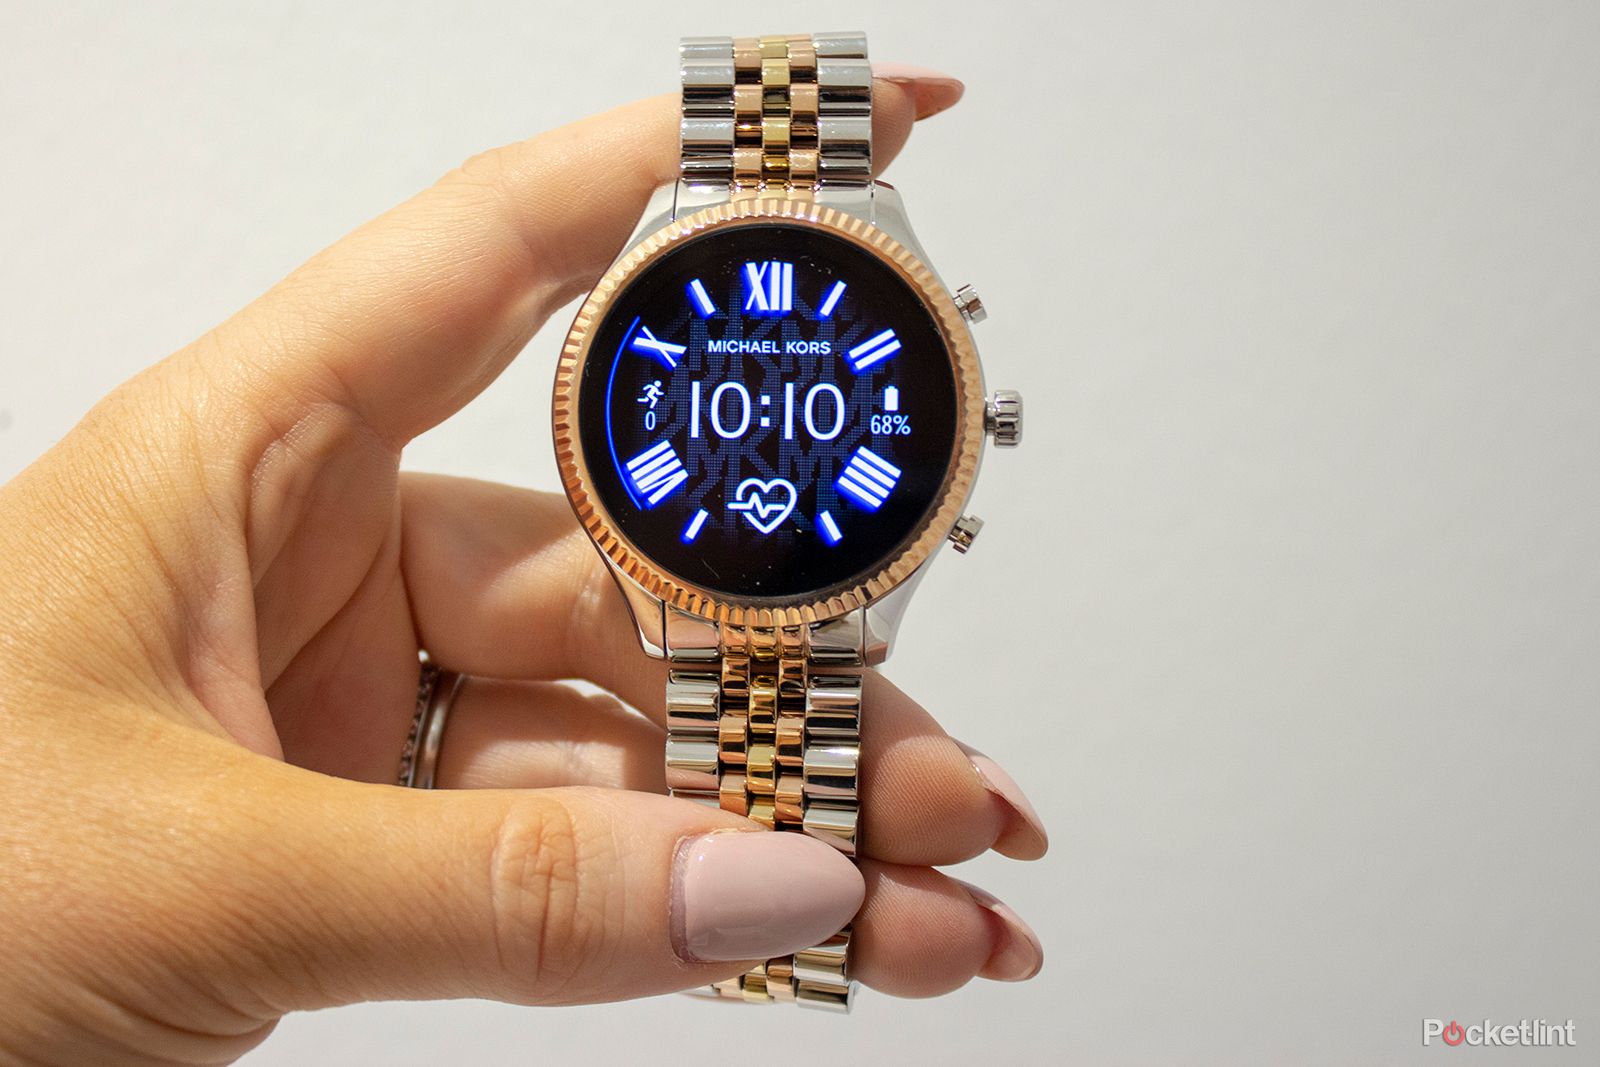 Which of the new Michael Kors smartwatches should you choose?